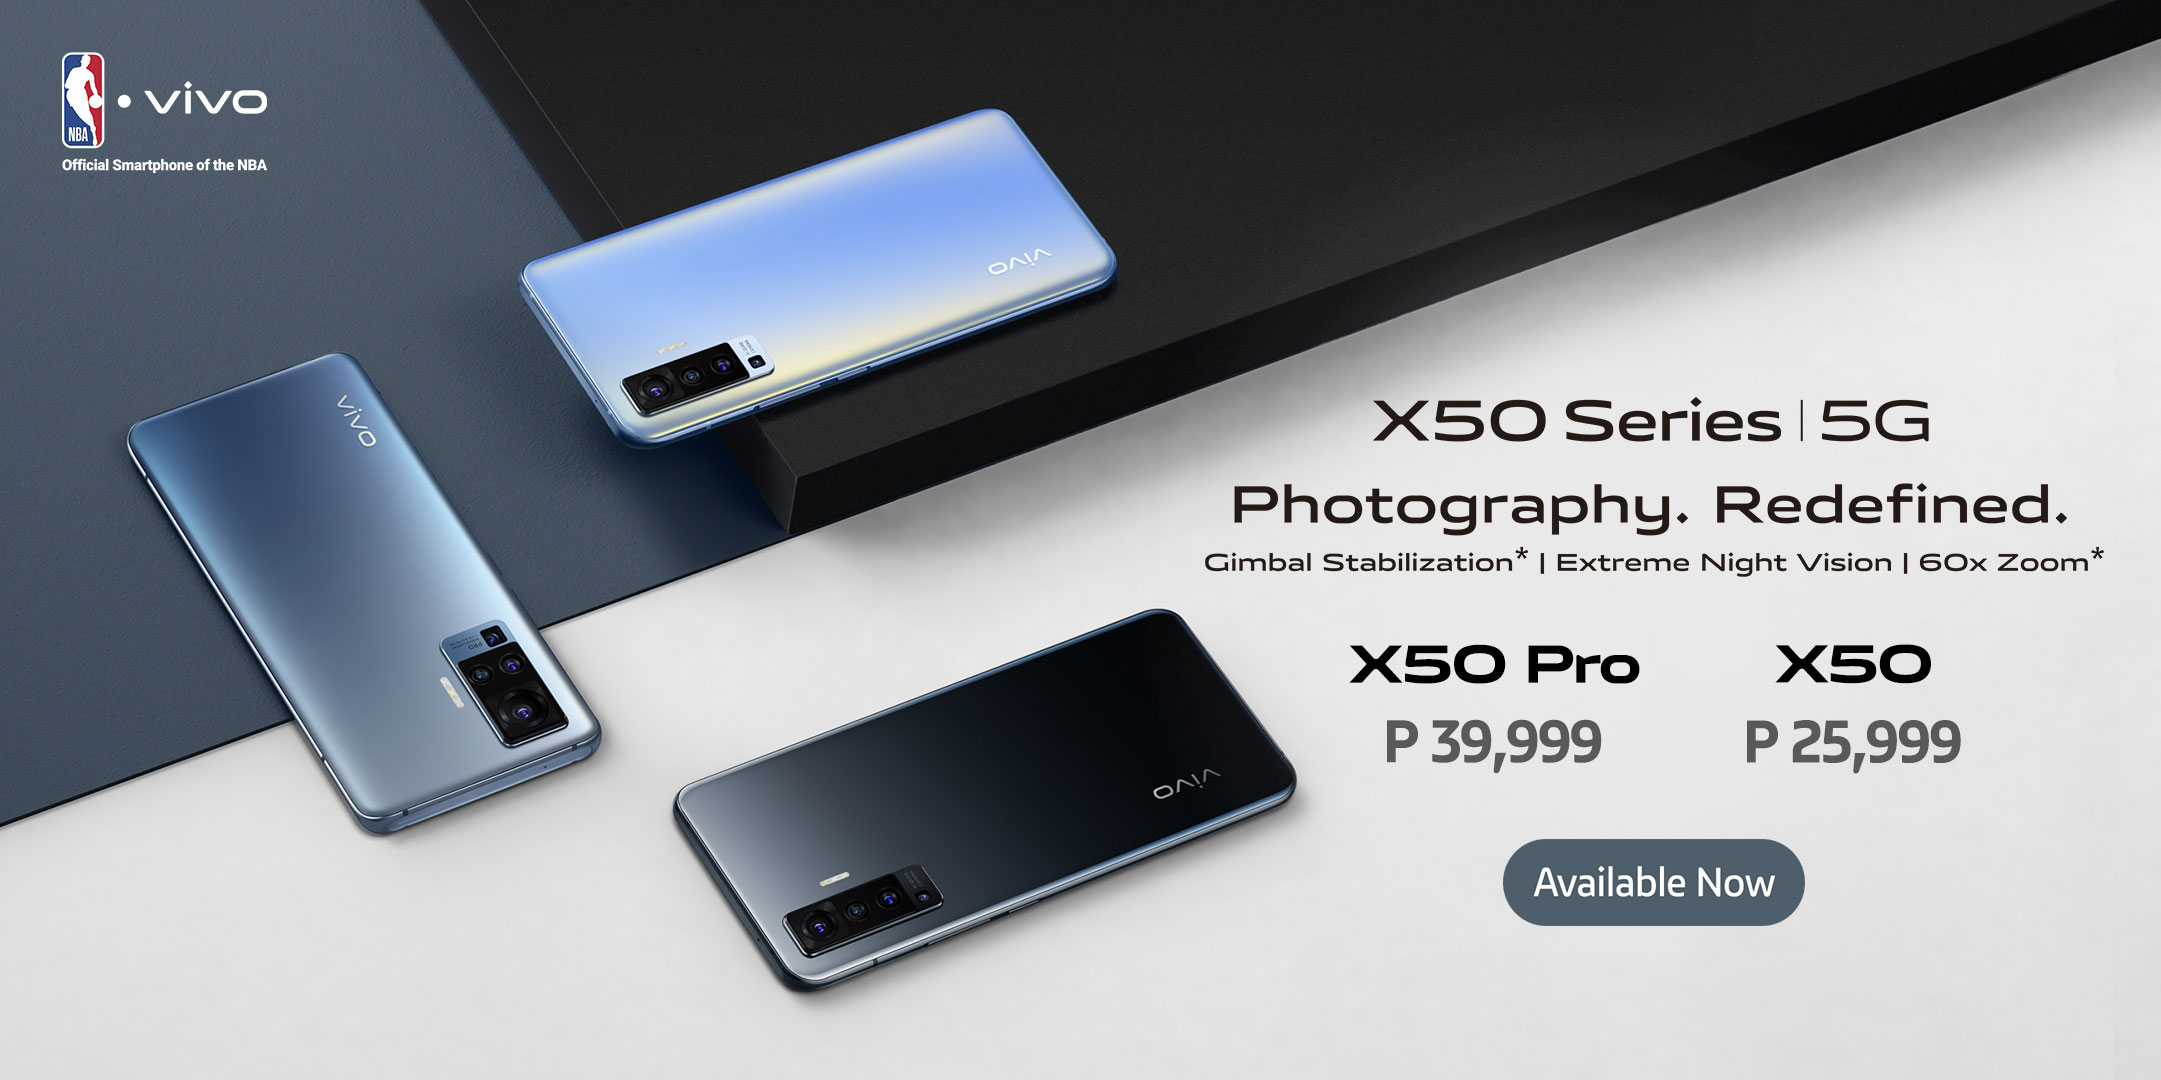 vivo X50 Pro and X50 now available in the Philippines